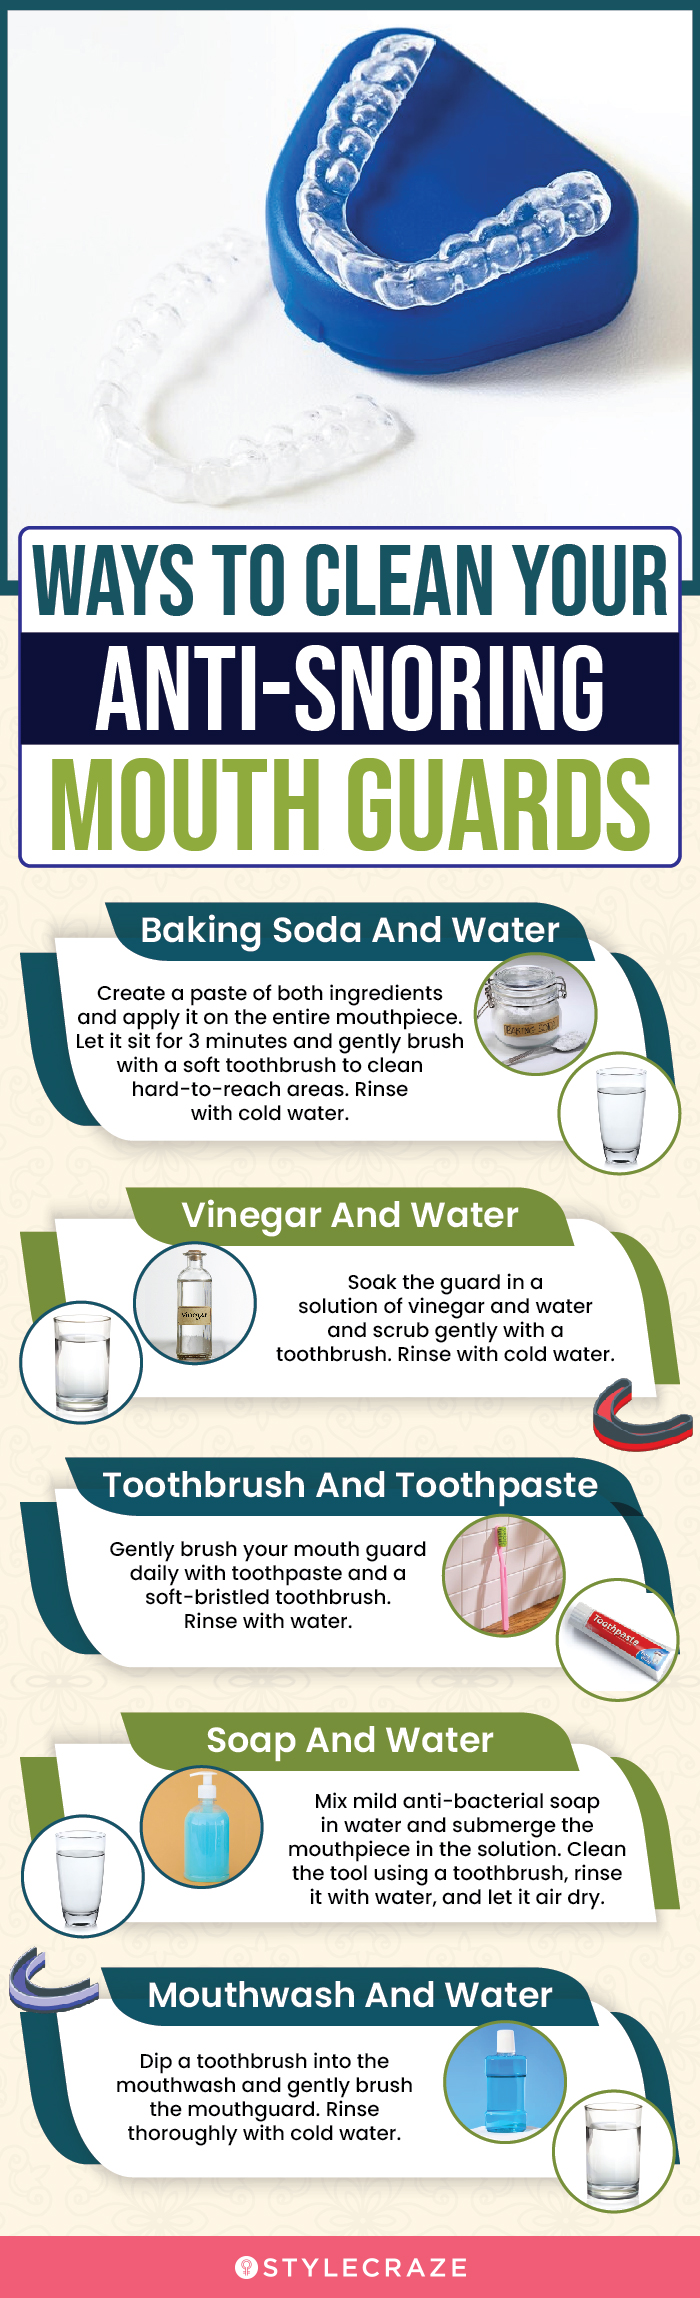 Ways To Clean Your Anti-Snoring Mouth Guards (infographic)